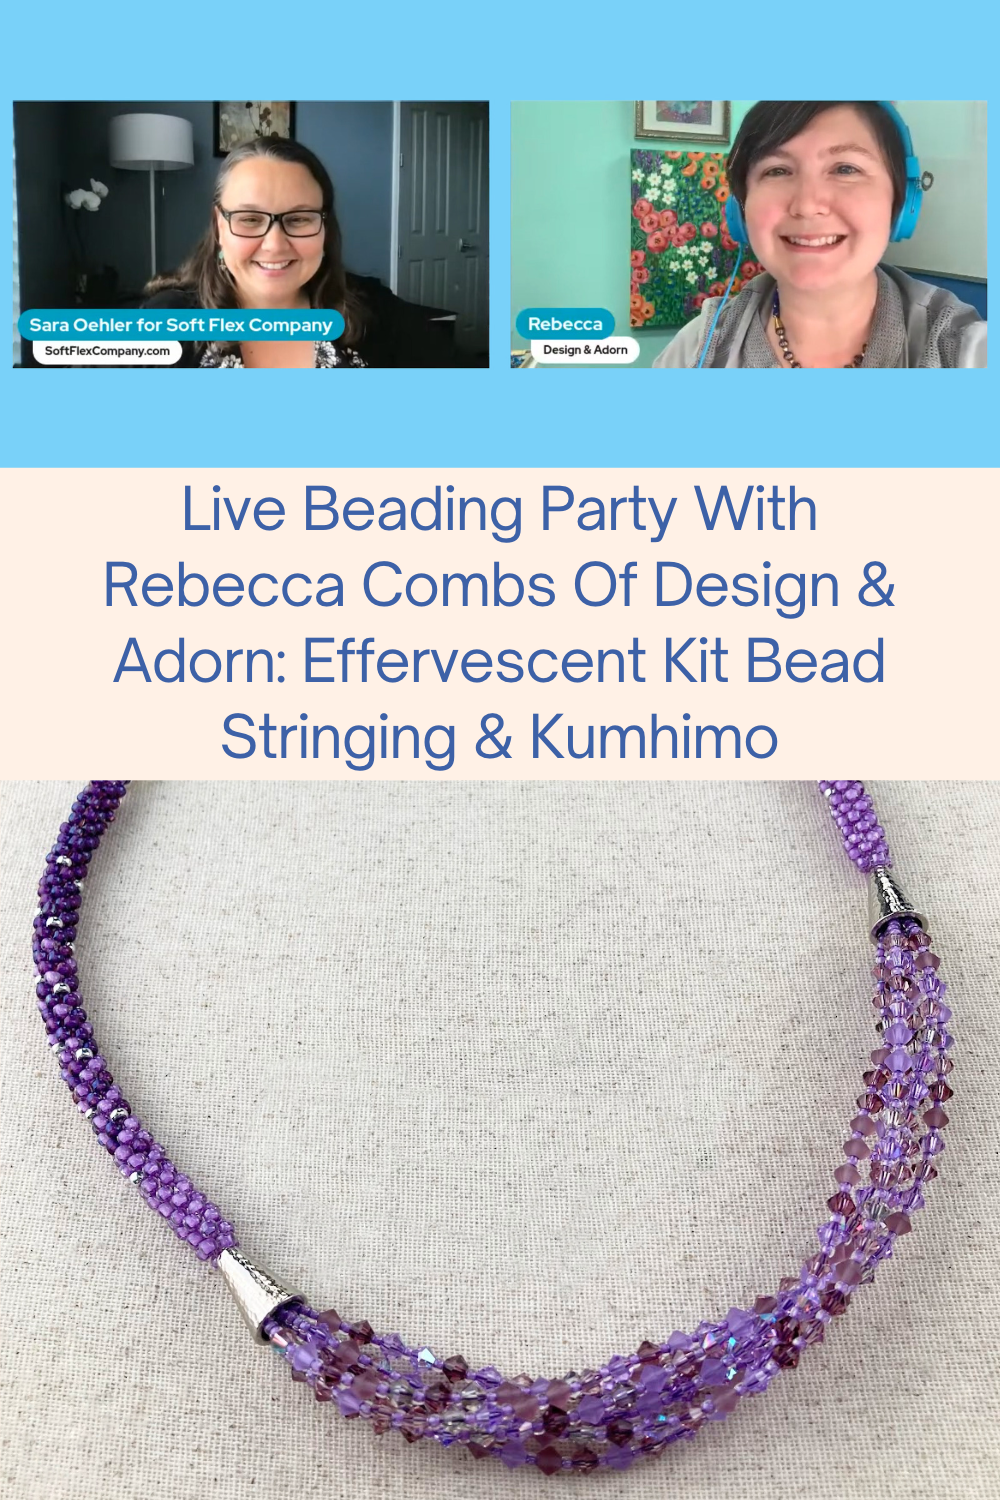 Live Beading Party With Rebecca Combs Of Design & Adorn/ Effervescent Kit Bead Stringing & Kumhimo Collage